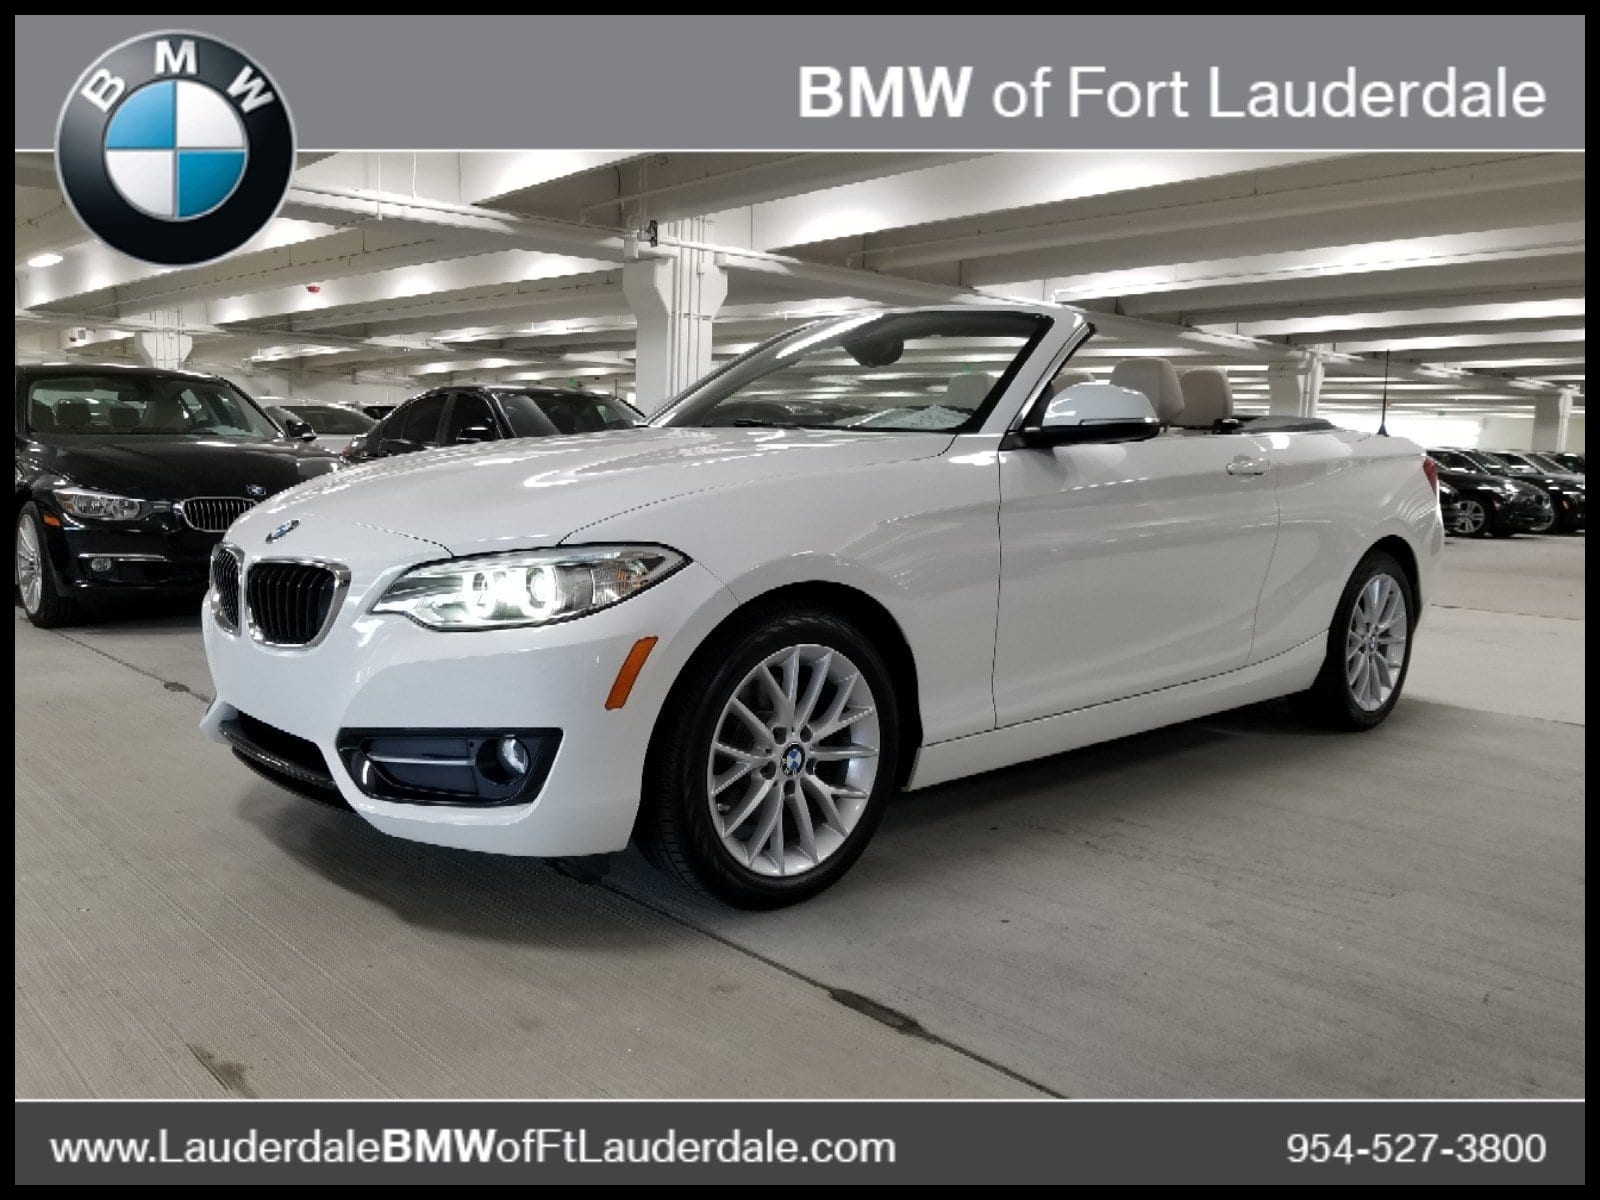 Certified Used 2016 BMW 228i For Sale in Fort Lauderdale FL Serving North Miami Beach